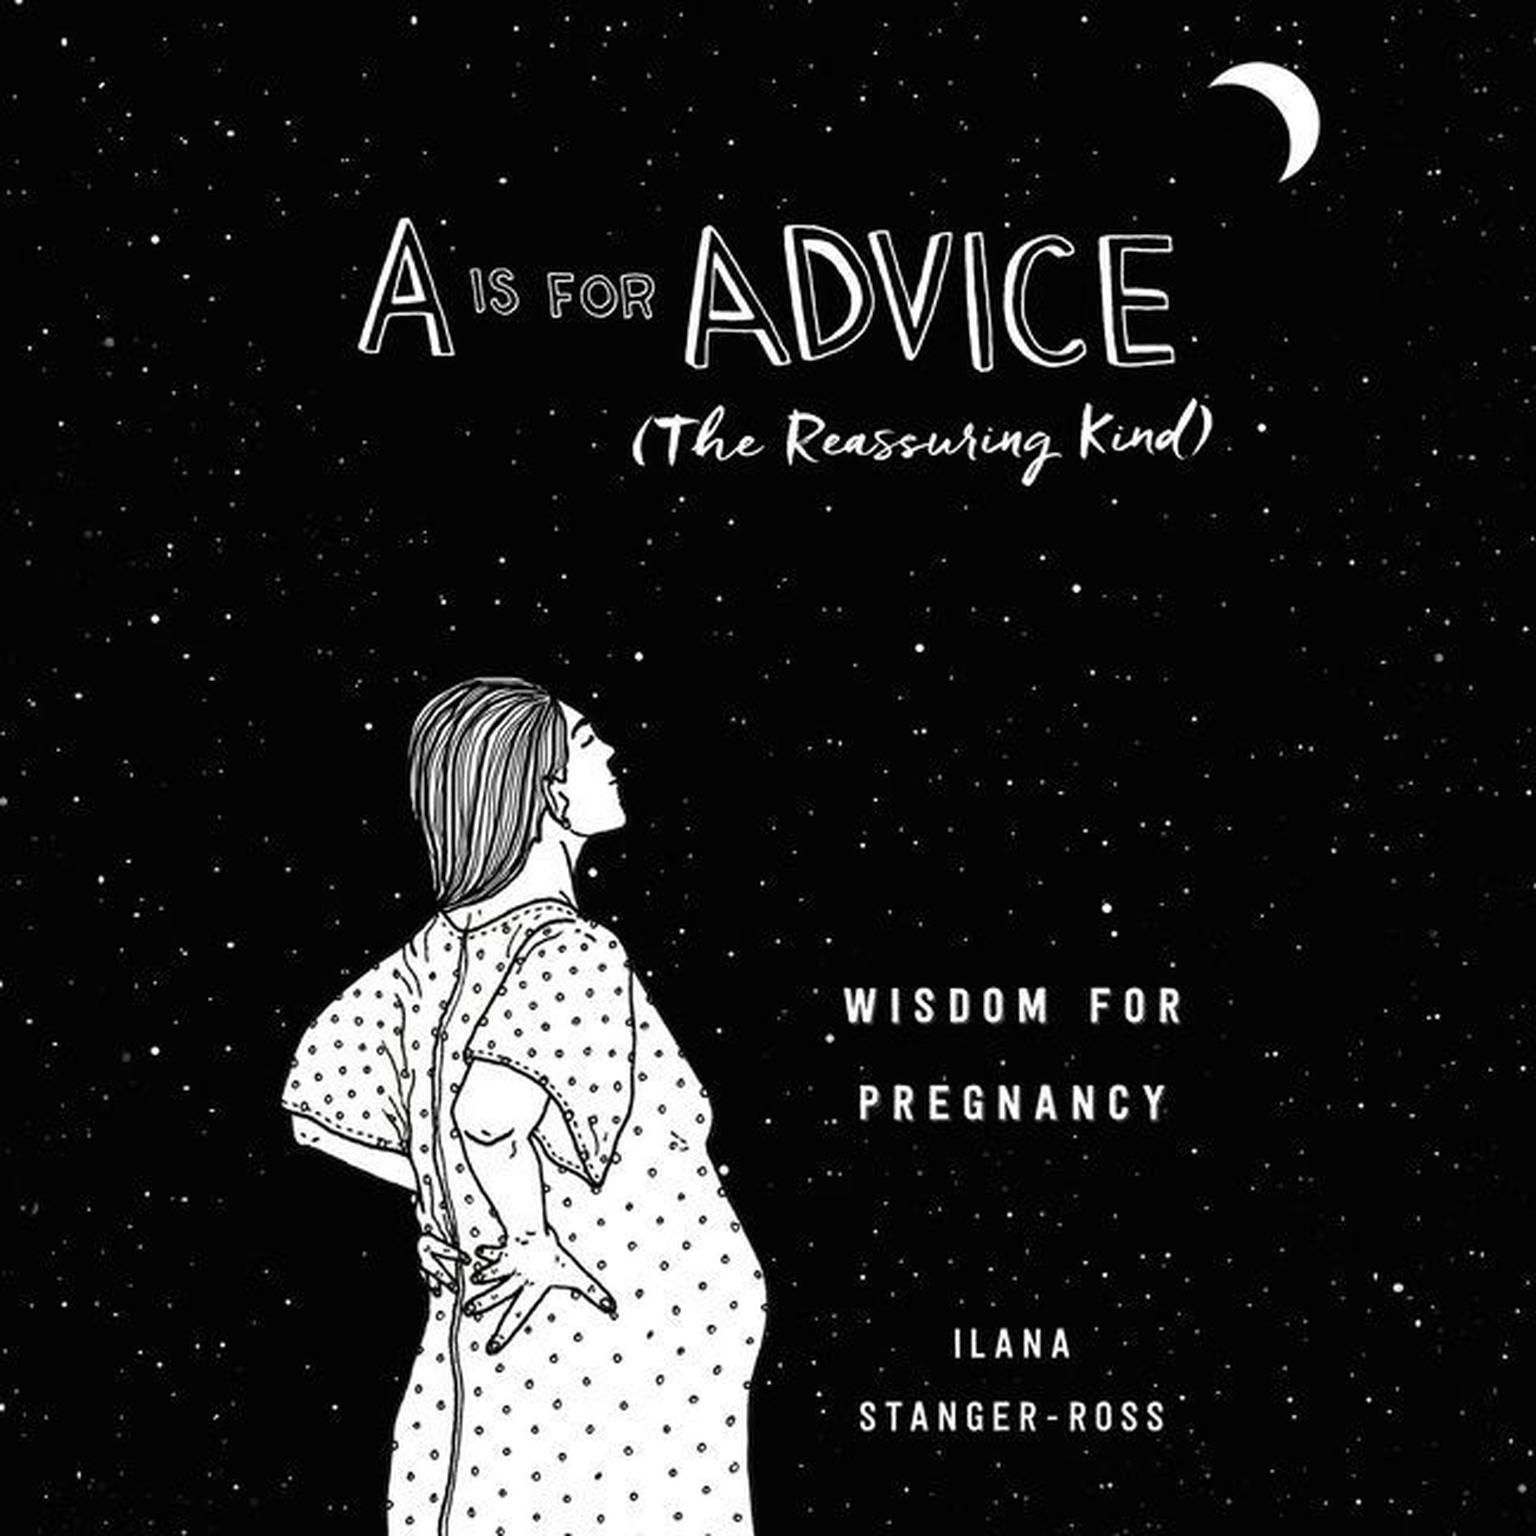 A Is for Advice (The Reassuring Kind): Wisdom for Pregnancy Audiobook, by Ilana Stanger-Ross